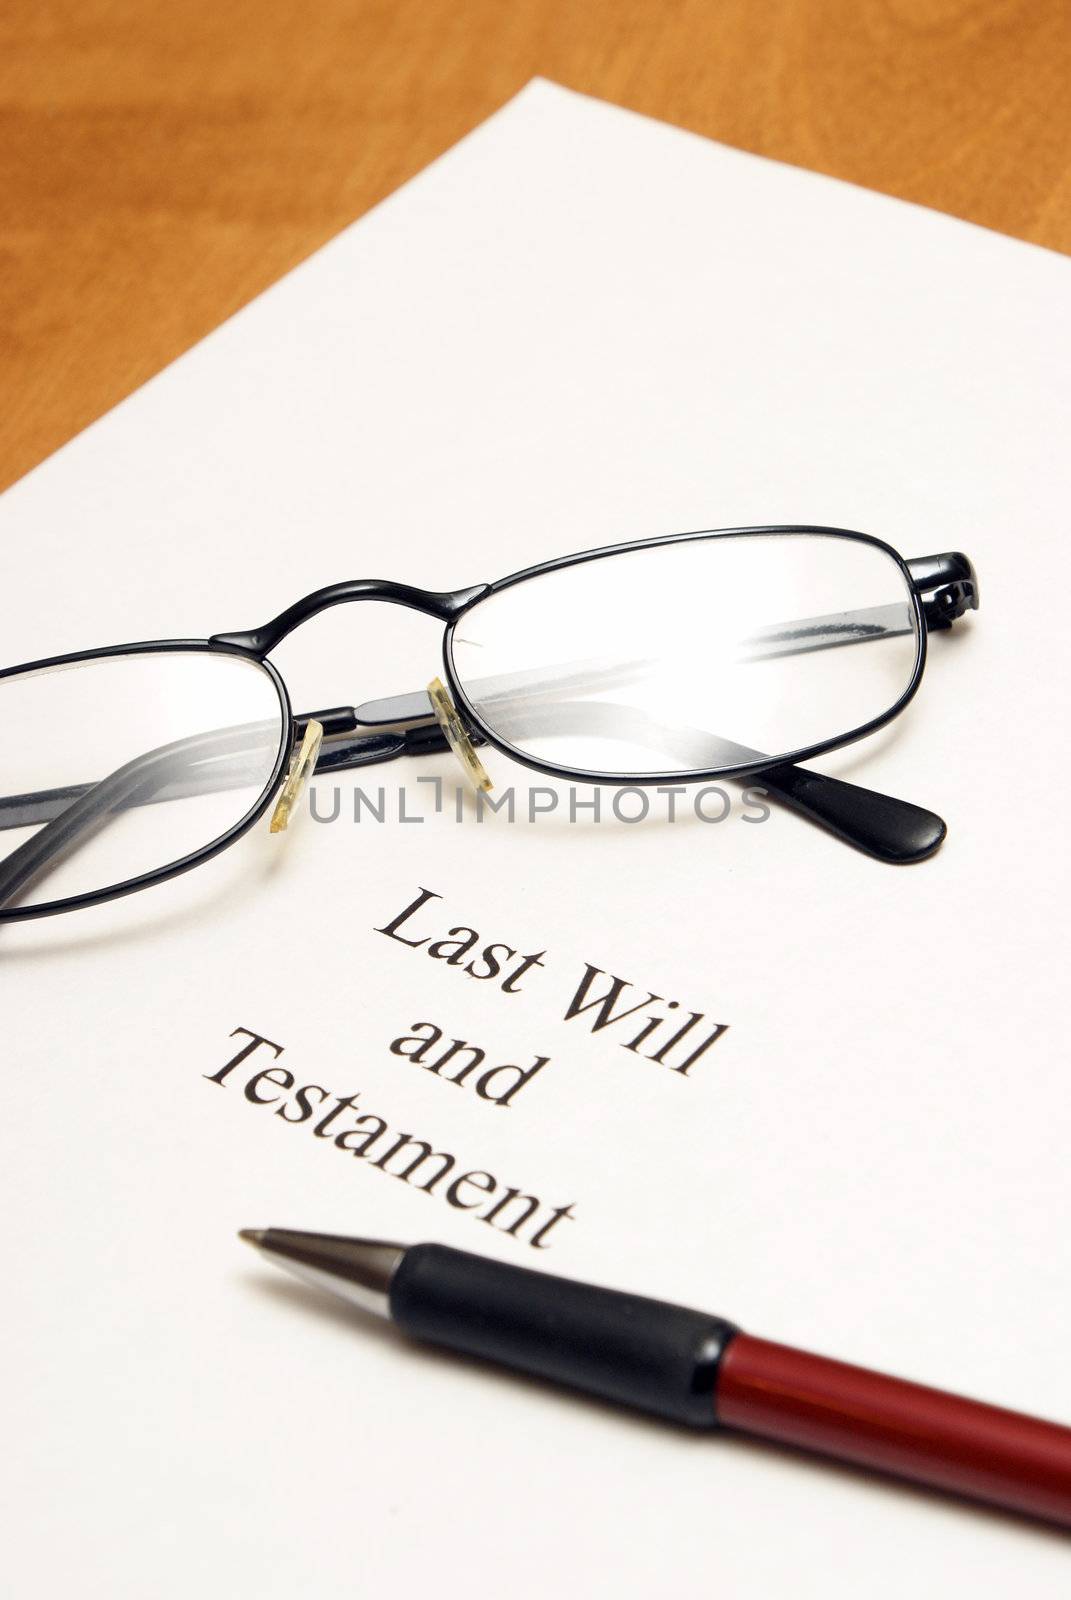 A will agreement for the deceased ones final arrangements.